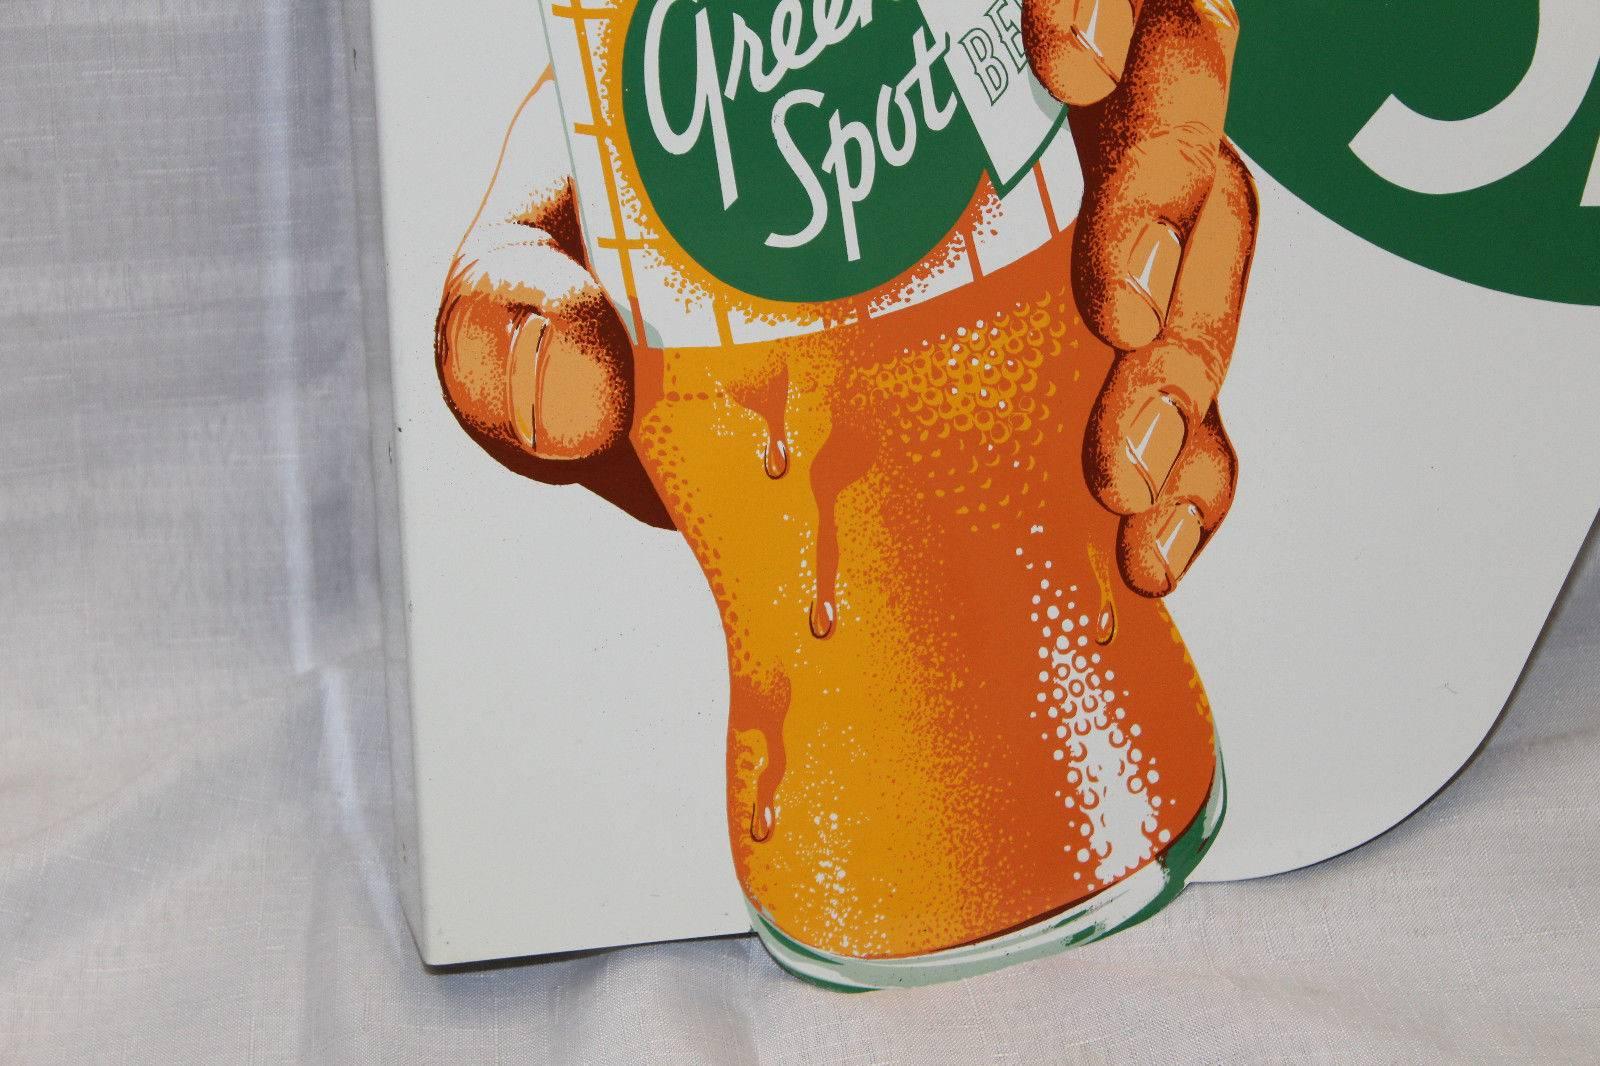 American 1950s NOS Green Spot Orange Soda Double-Sided Advertising Tin Flange Sign For Sale